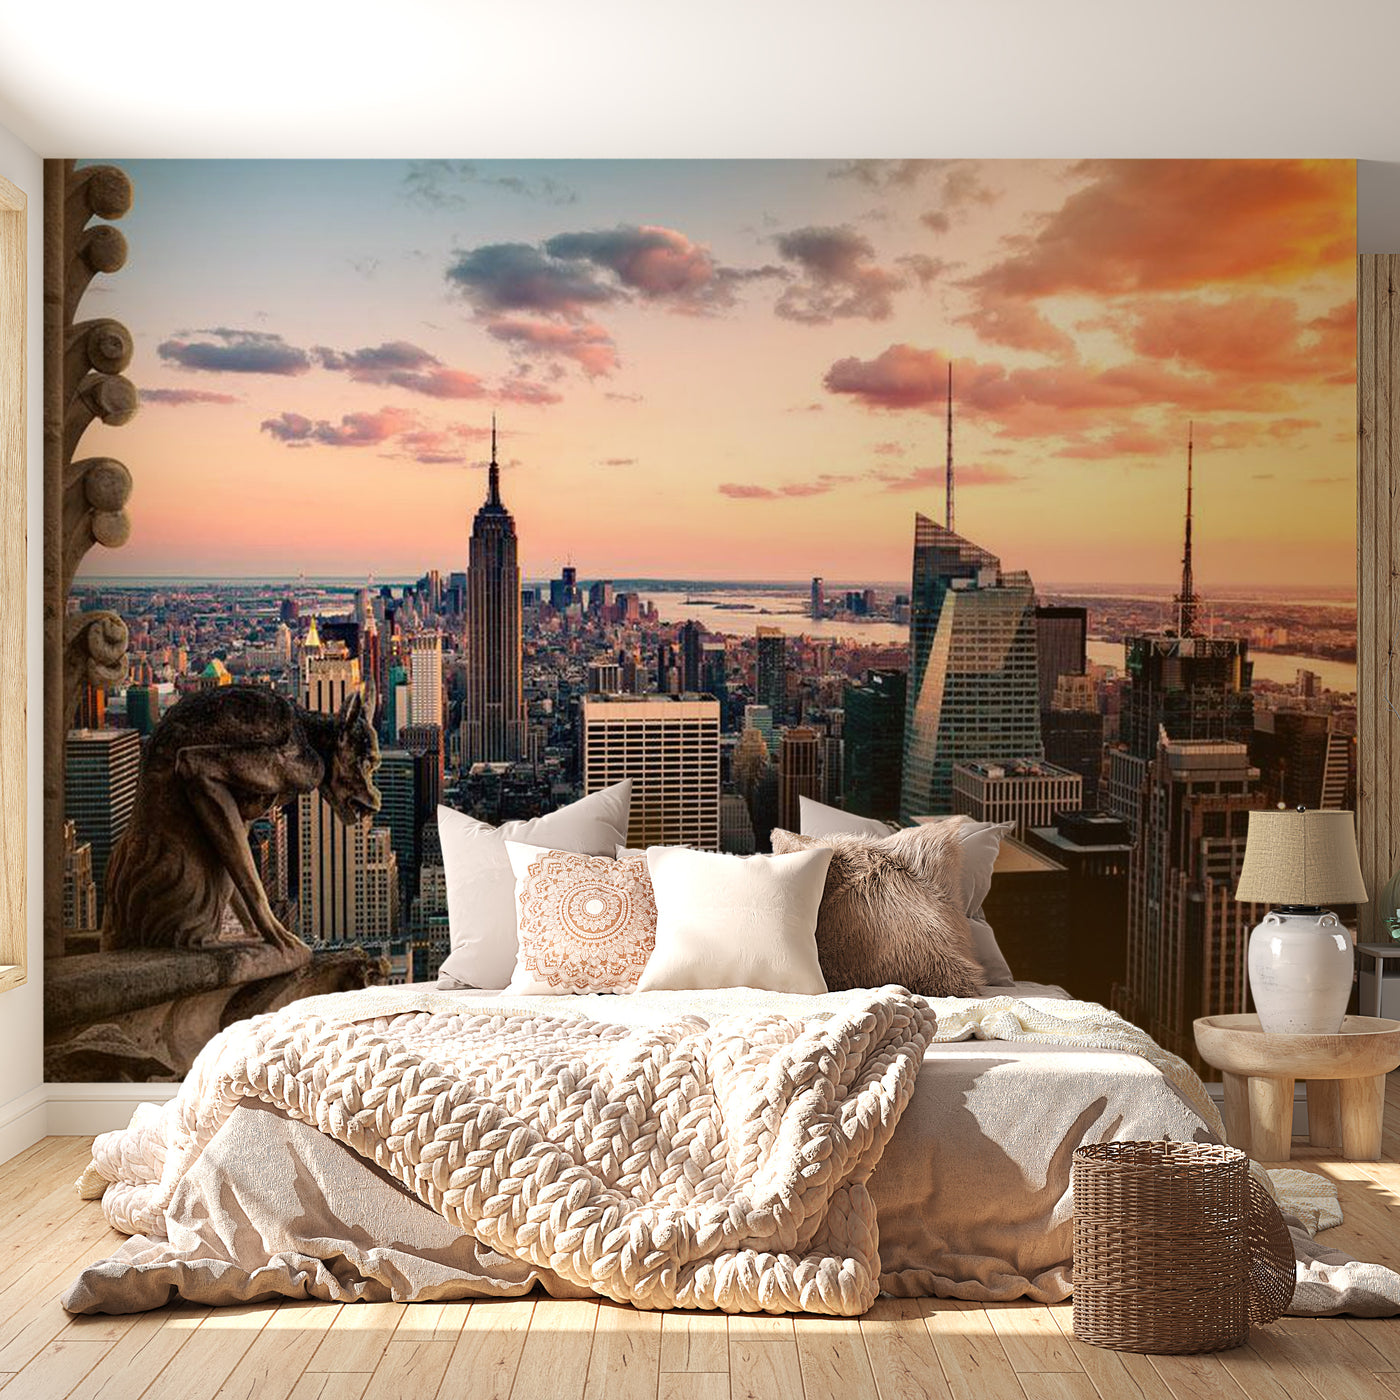 Peel & Stick Wall Mural - New York At Sunset - Removable Wall Decals